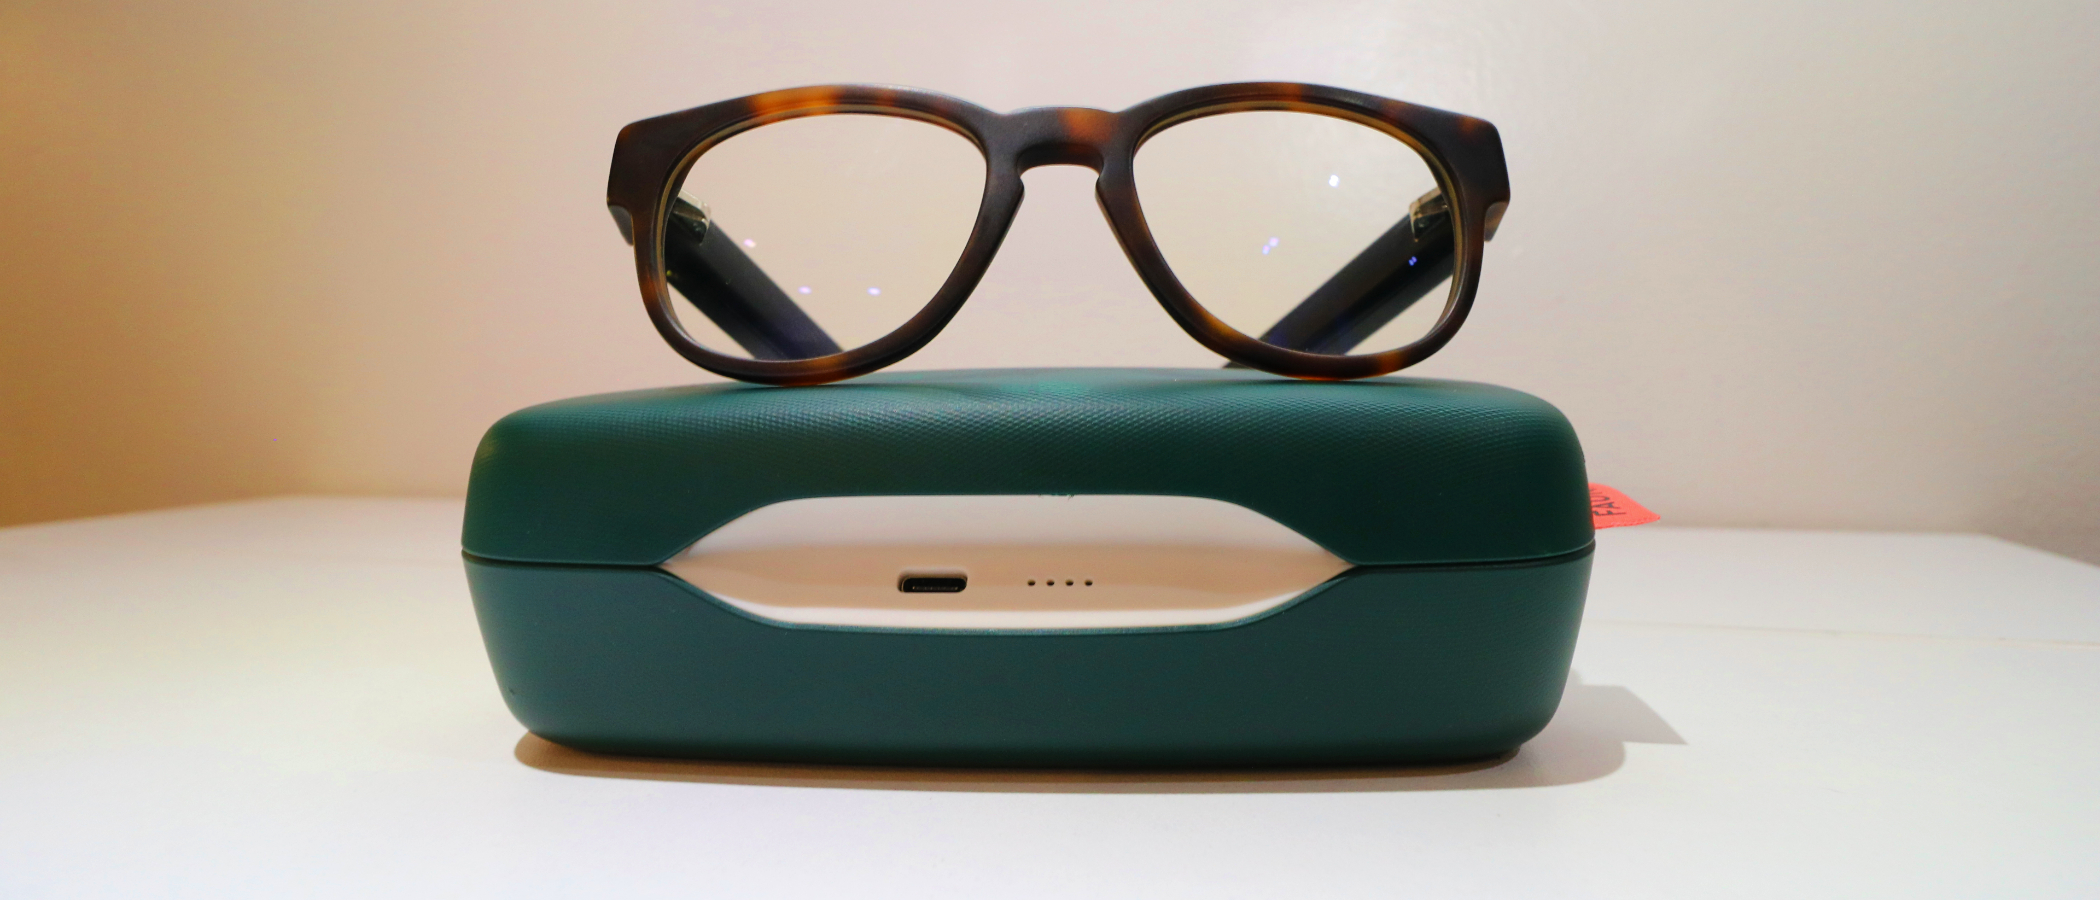 Fauna audio glasses review | Laptop Mag